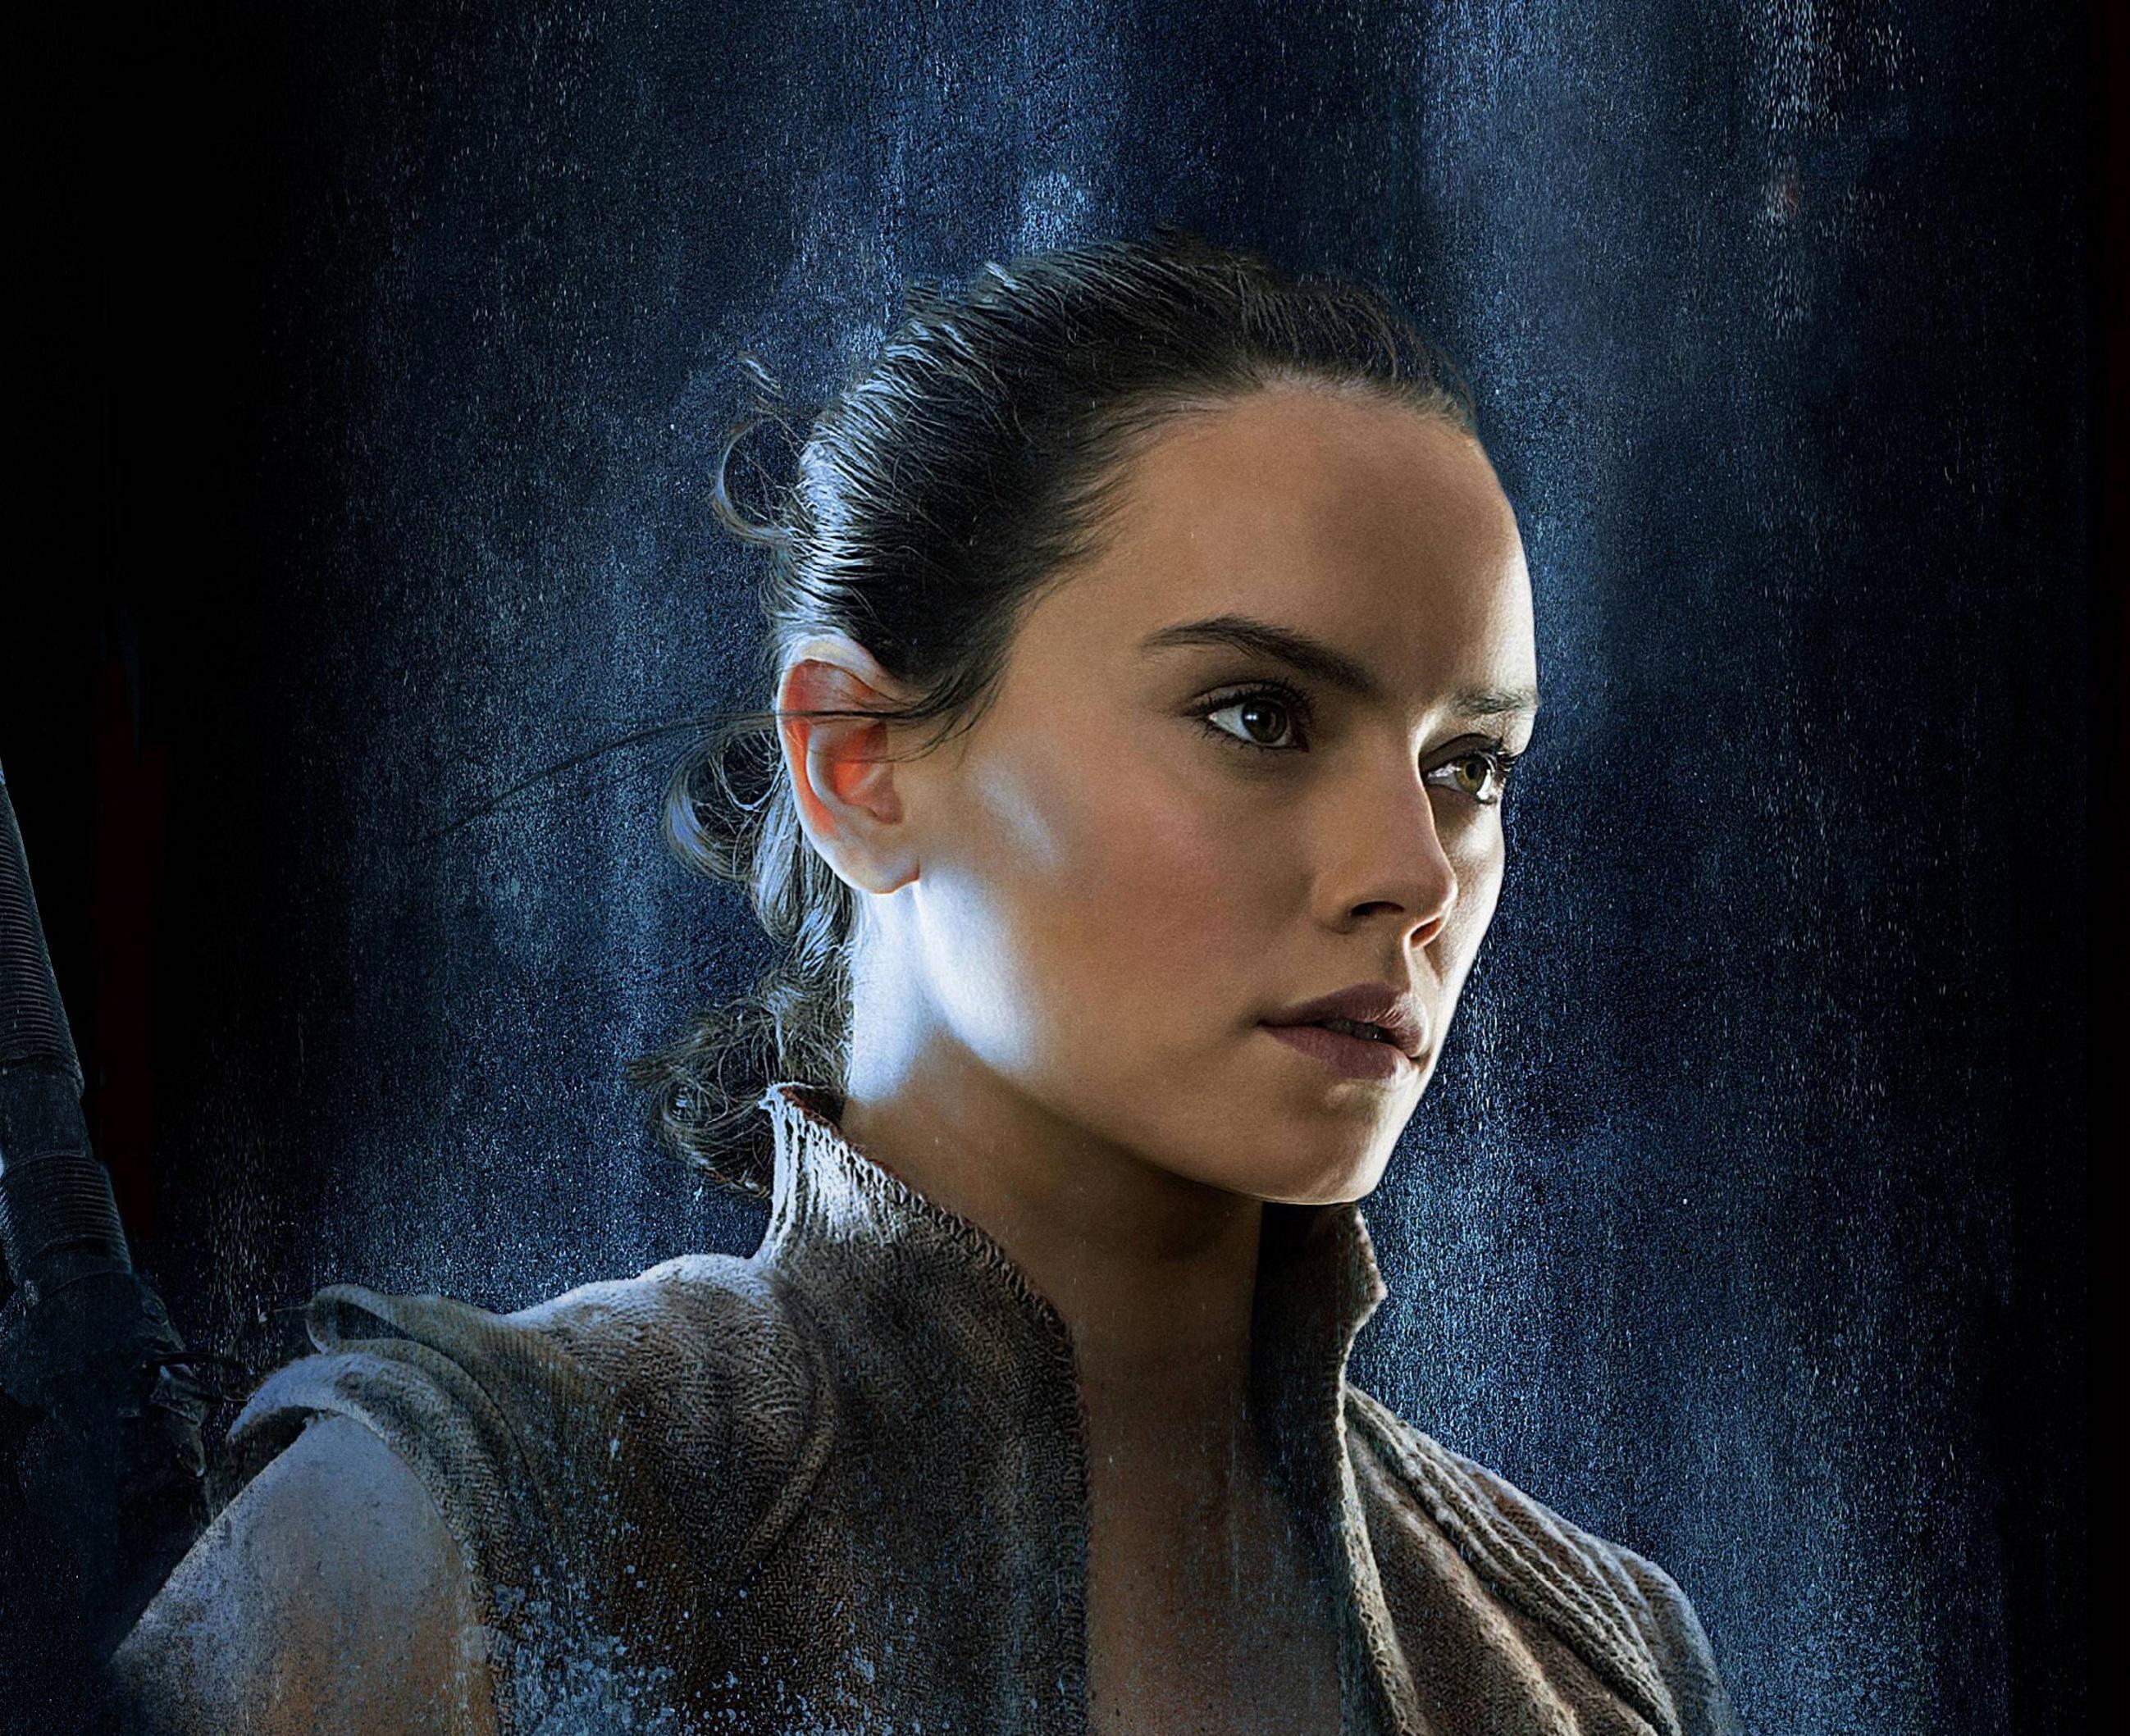 4K Daisy Ridley 2020 Wallpapers